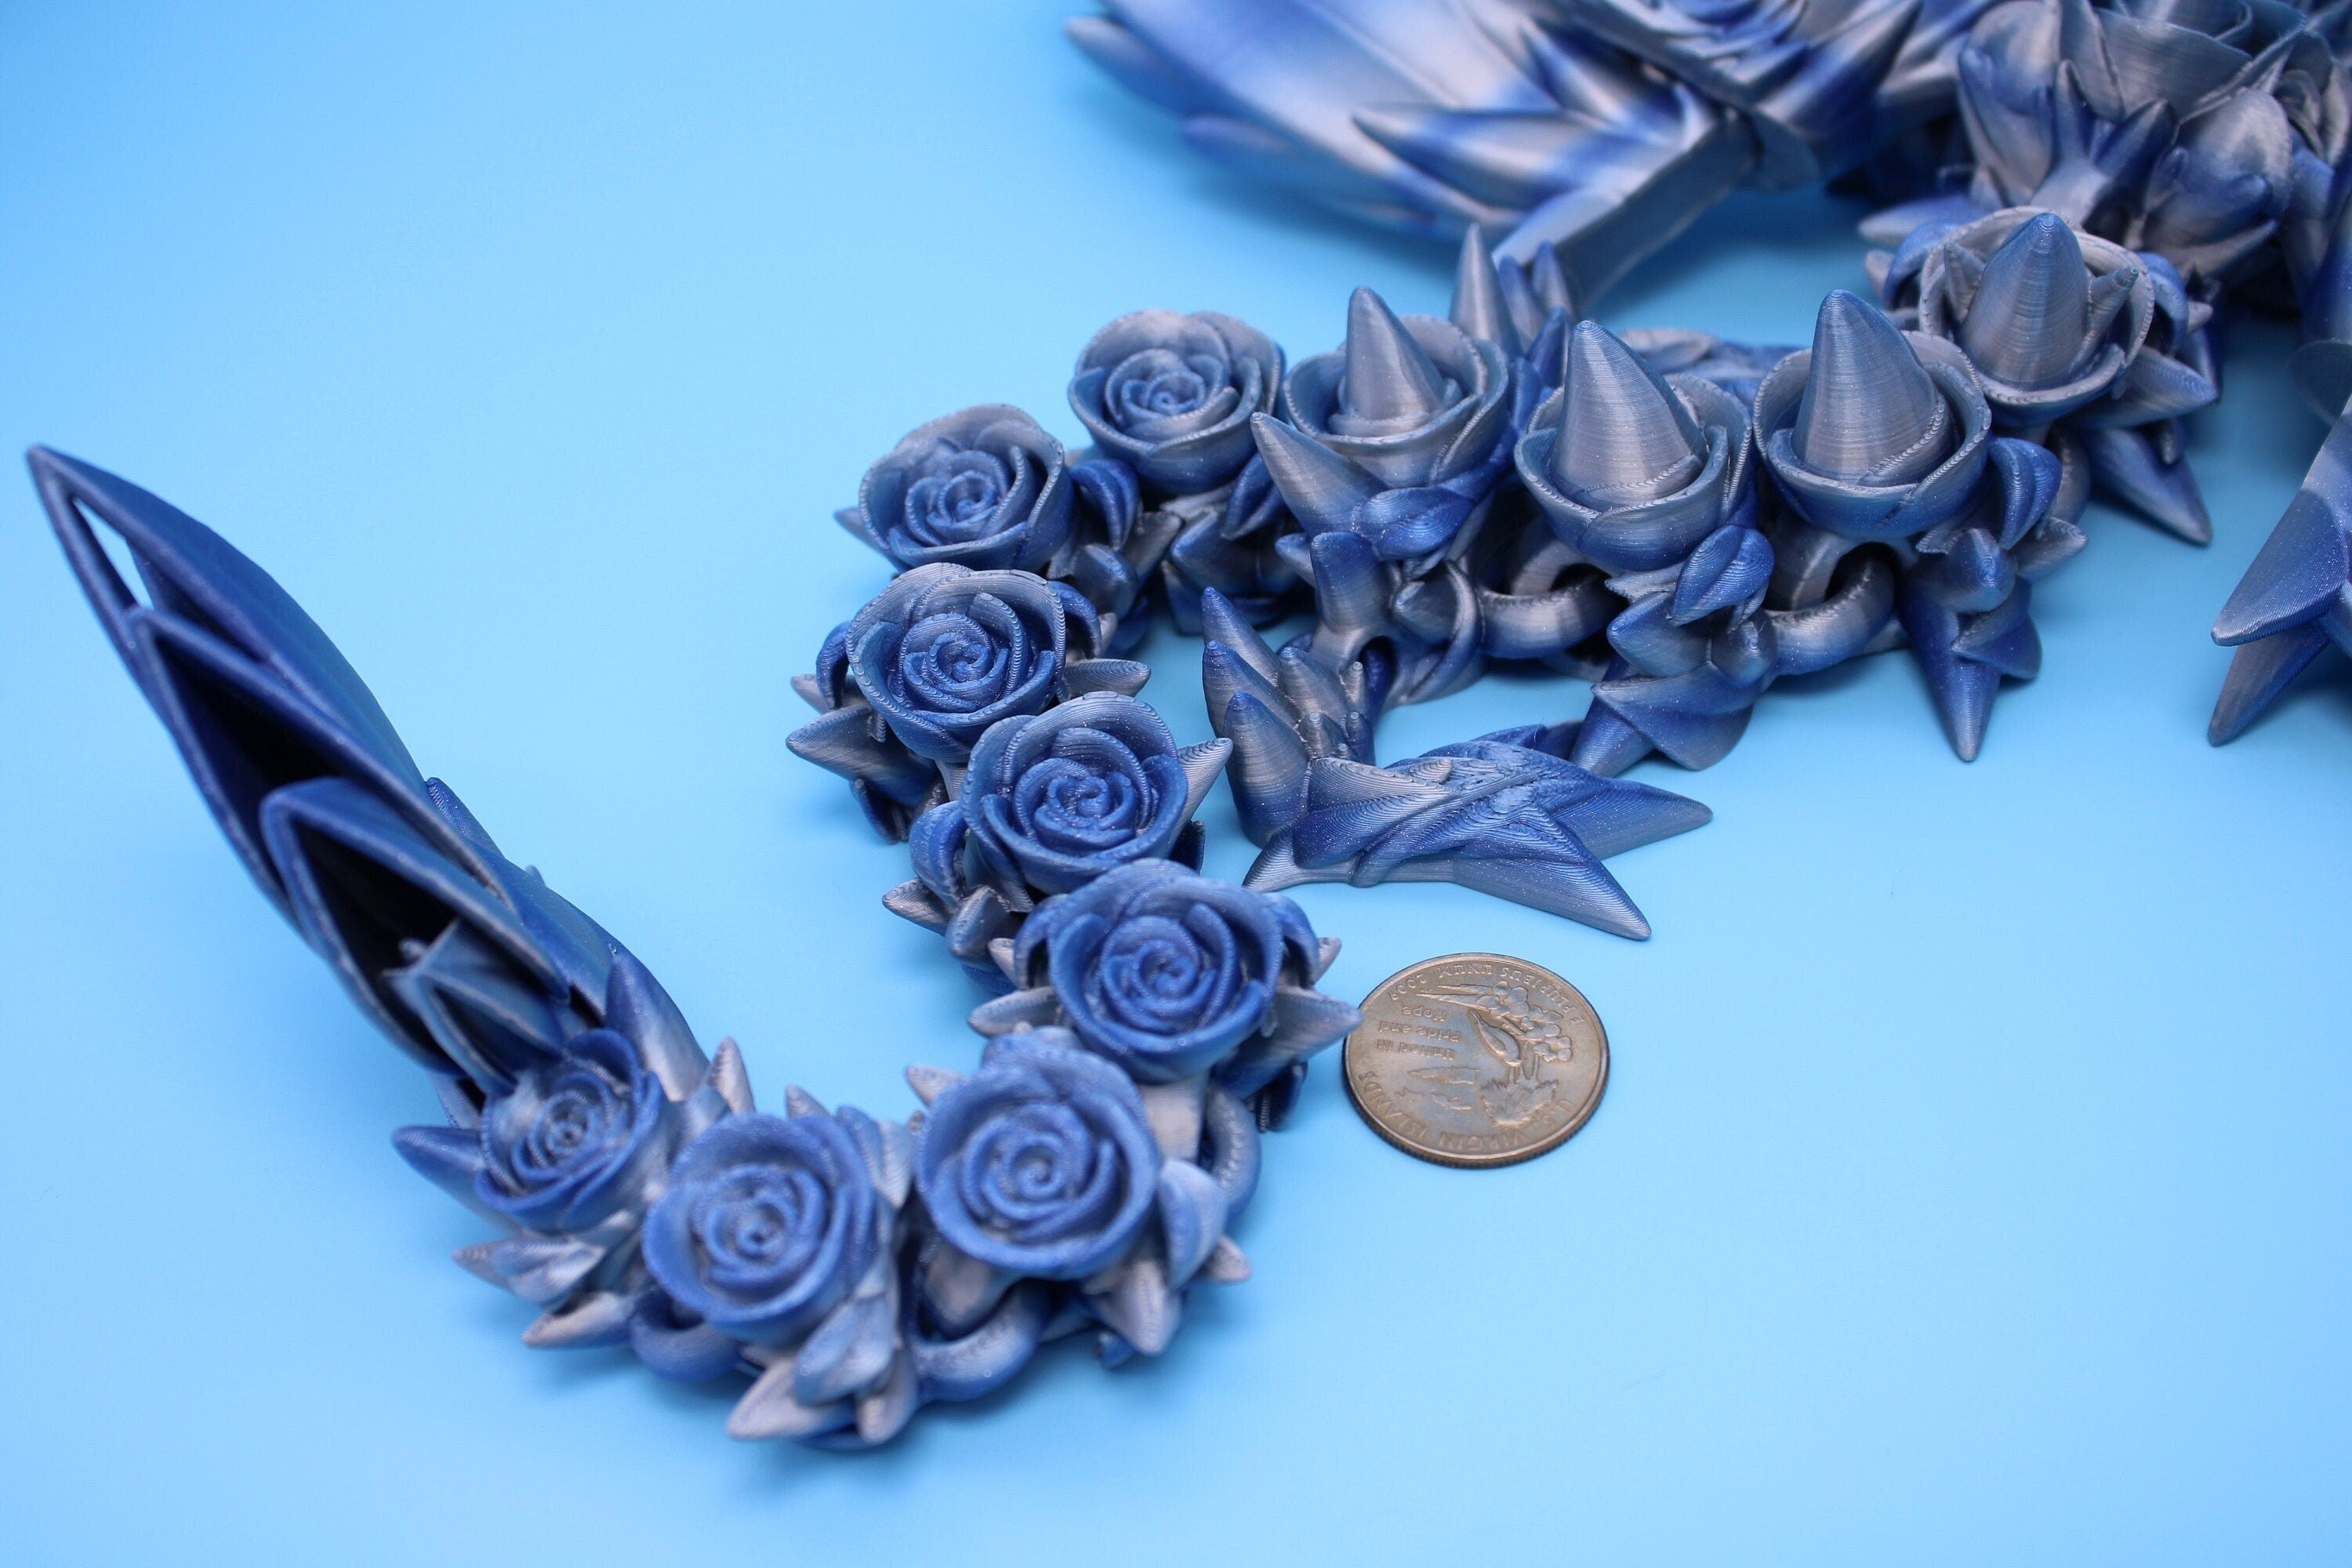 Blue / Silver Rose Wing Articulating Dragon | 3D Printed Fidget | Flexi Toy | Adult Fidget Toy | Sensory Desk Toy | 19 in. | Valentines Day